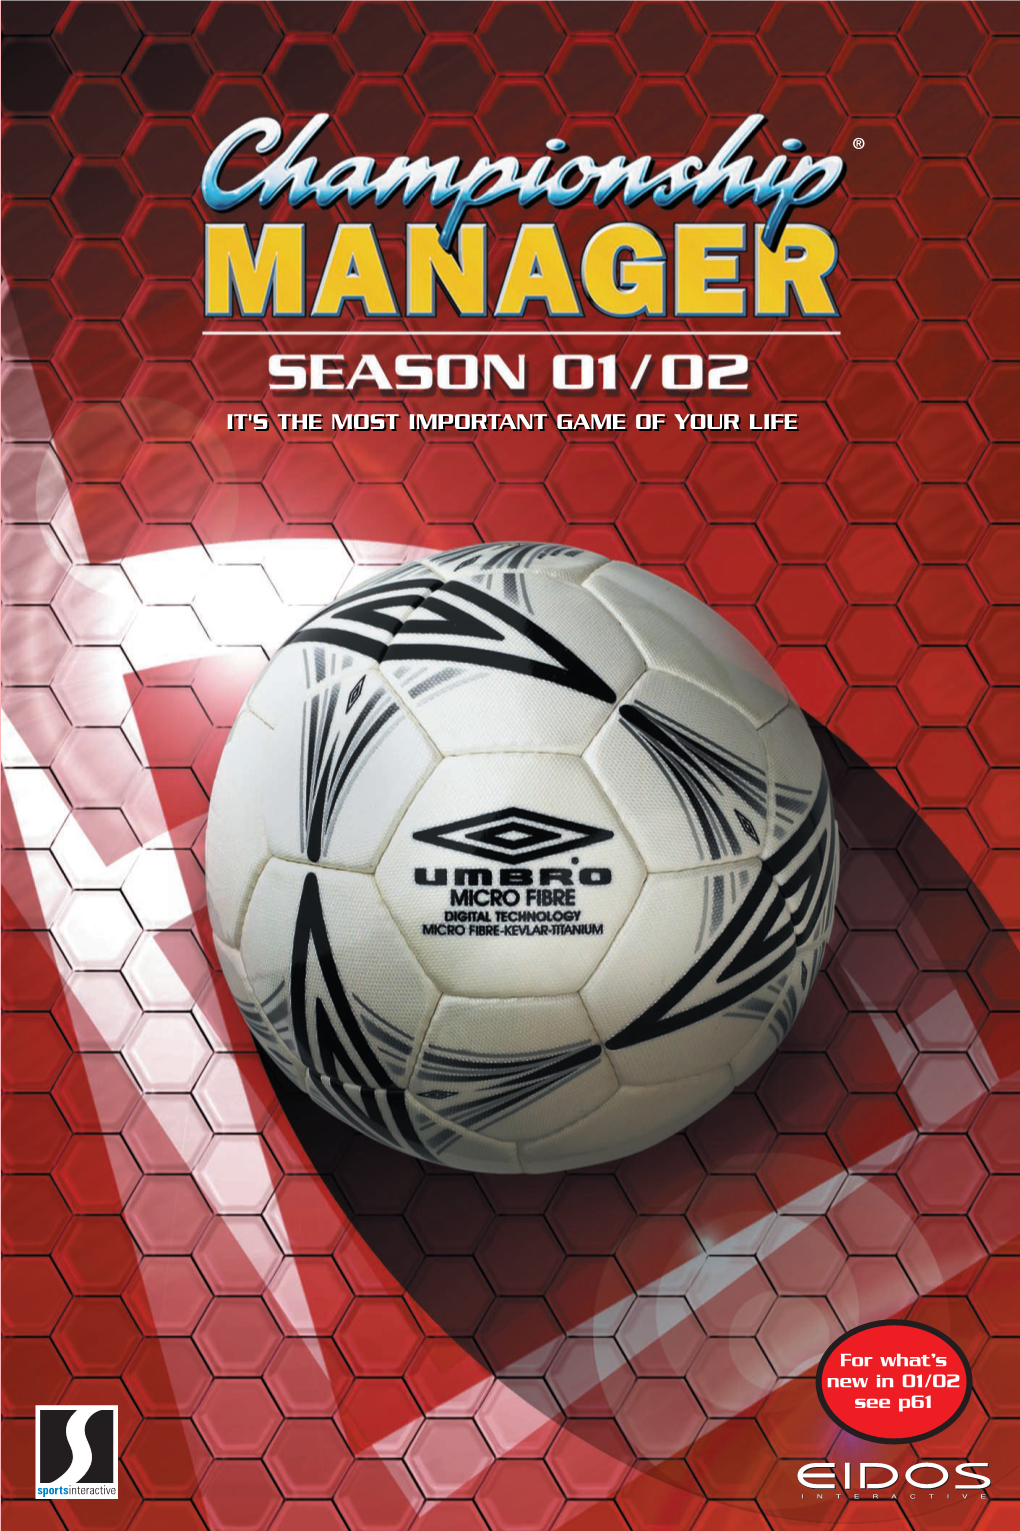 Championship Manager: Season 01/02 © Eidos Interactive Limited, 2001